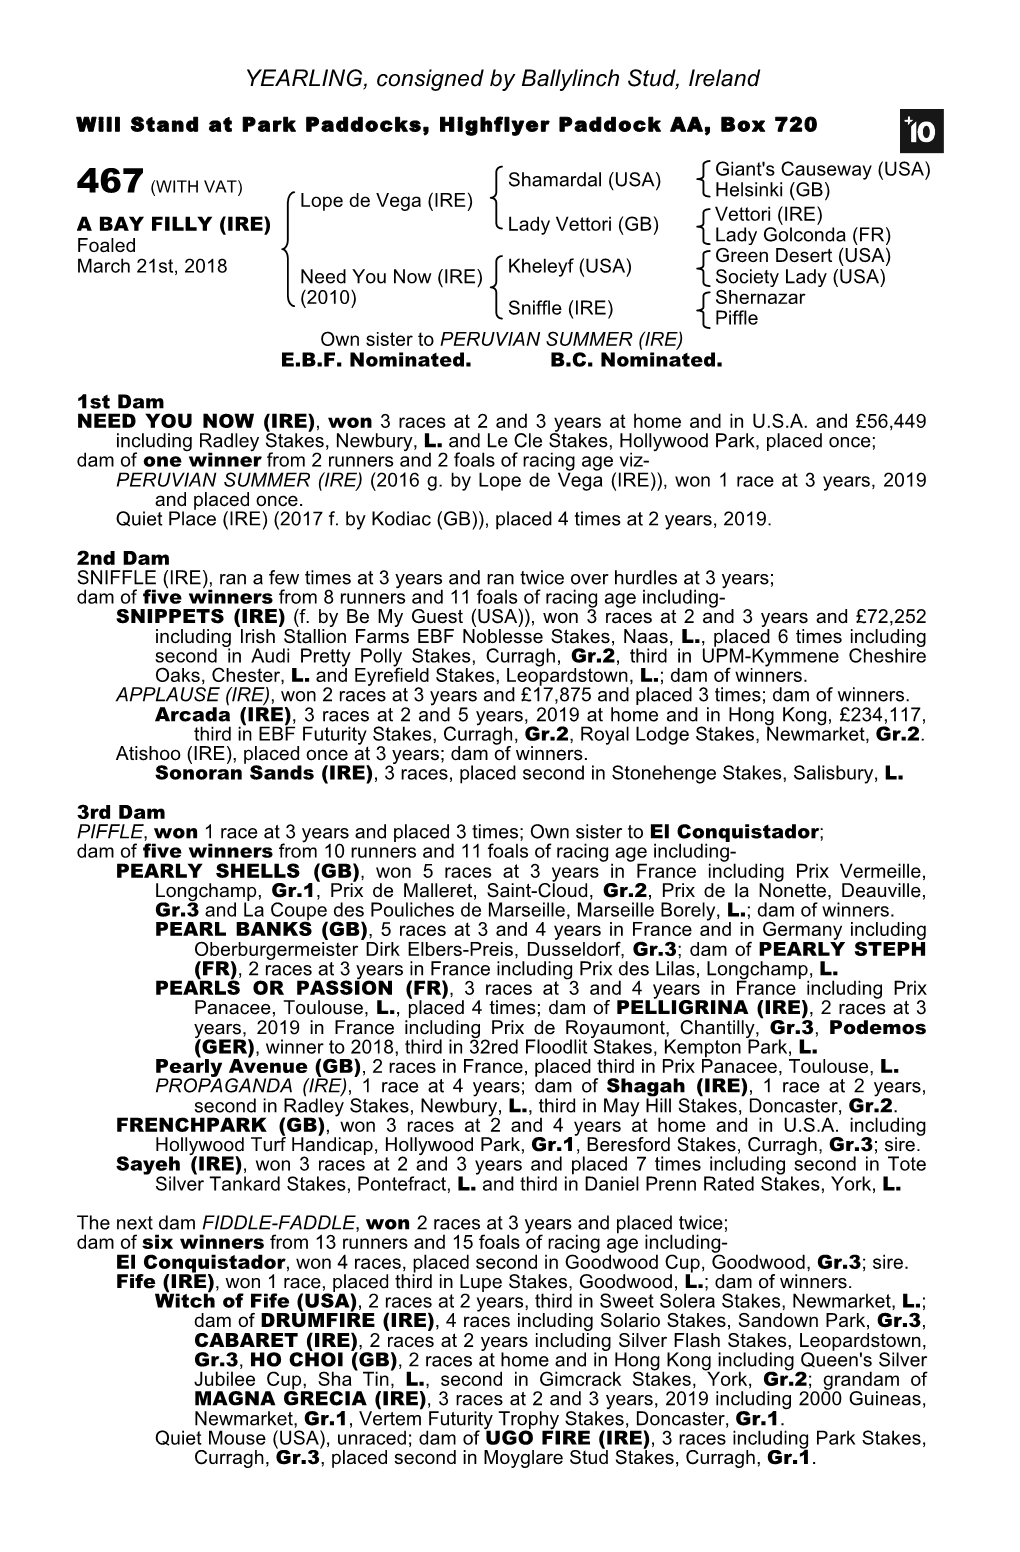 YEARLING, Consigned by Ballylinch Stud, Ireland